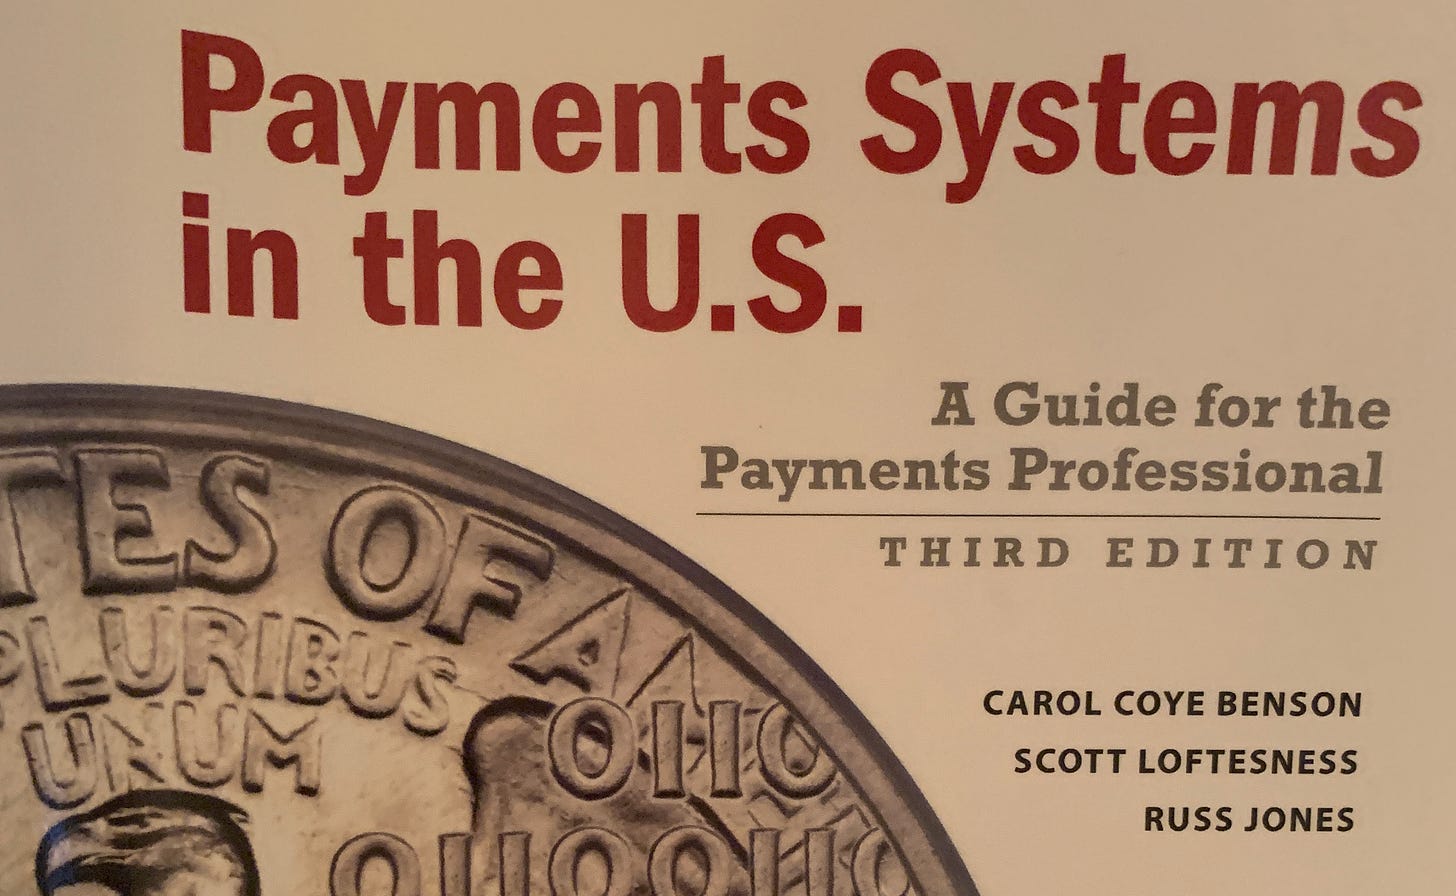 Payement Systems in the U.S.